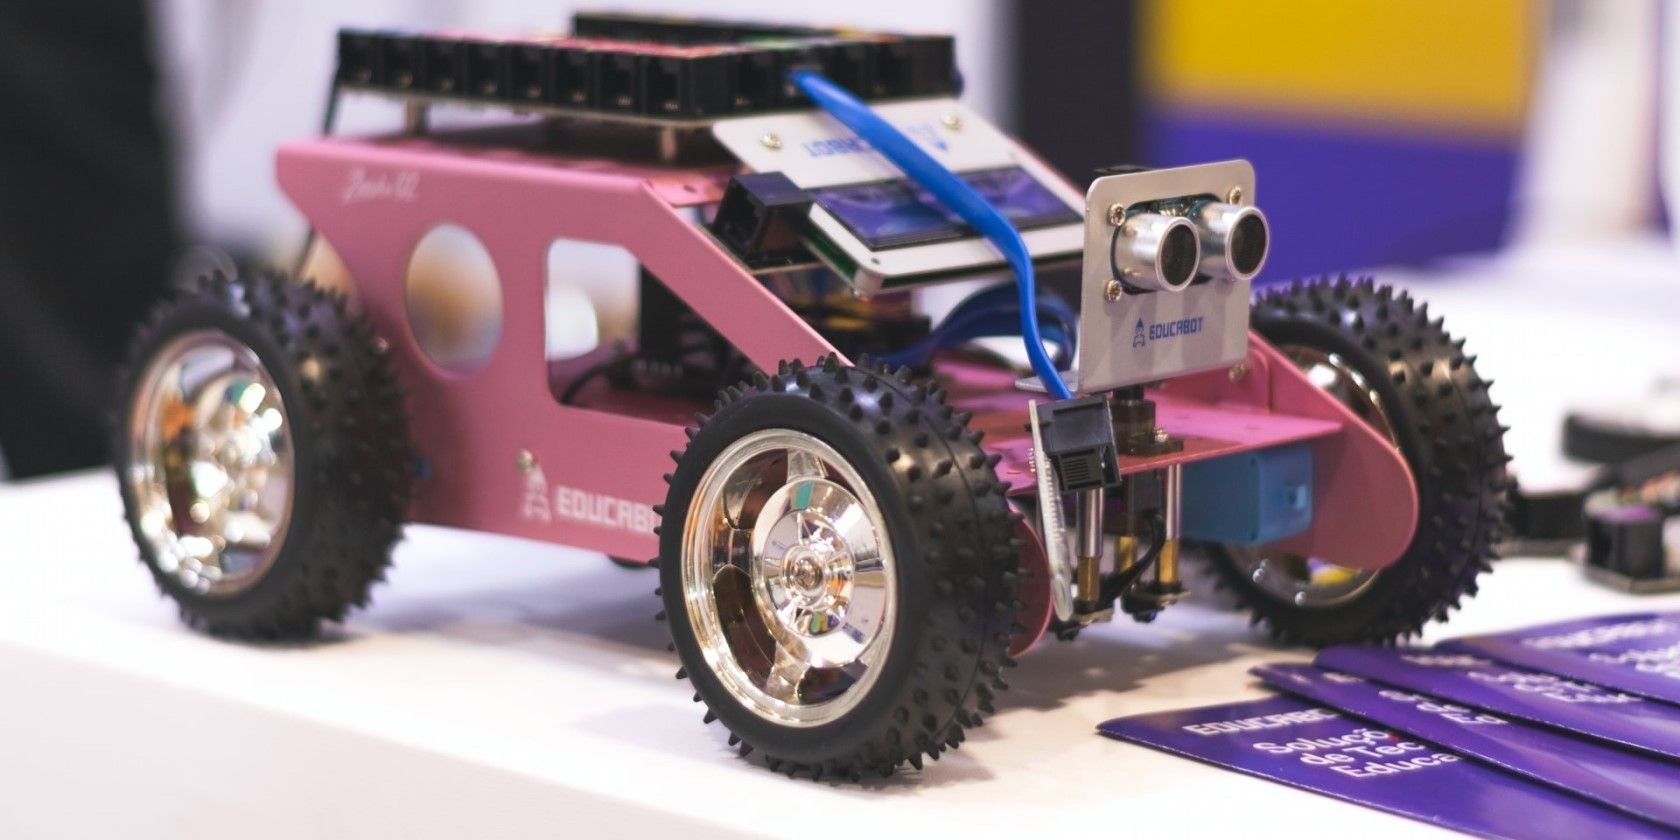 What You Need to Build Your Own Autonomous Robot